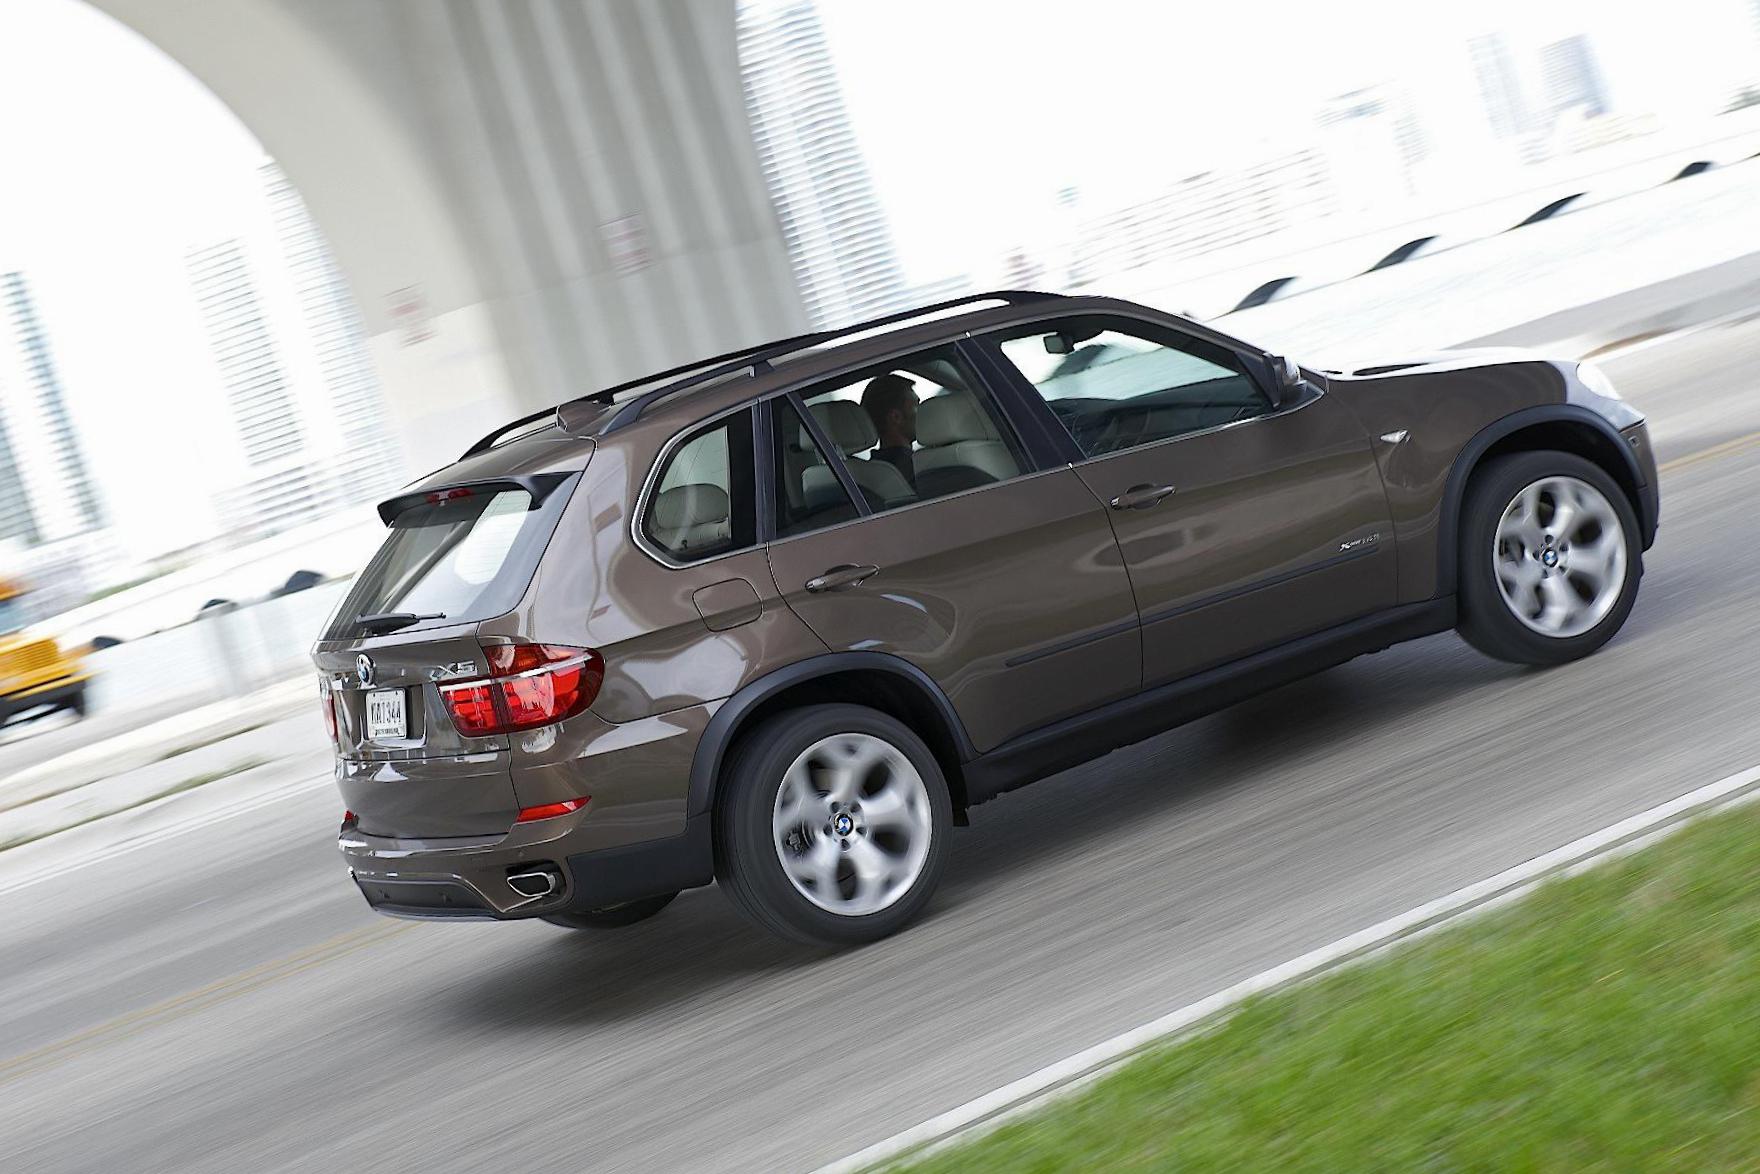 X5 (E70) BMW Specifications coupe